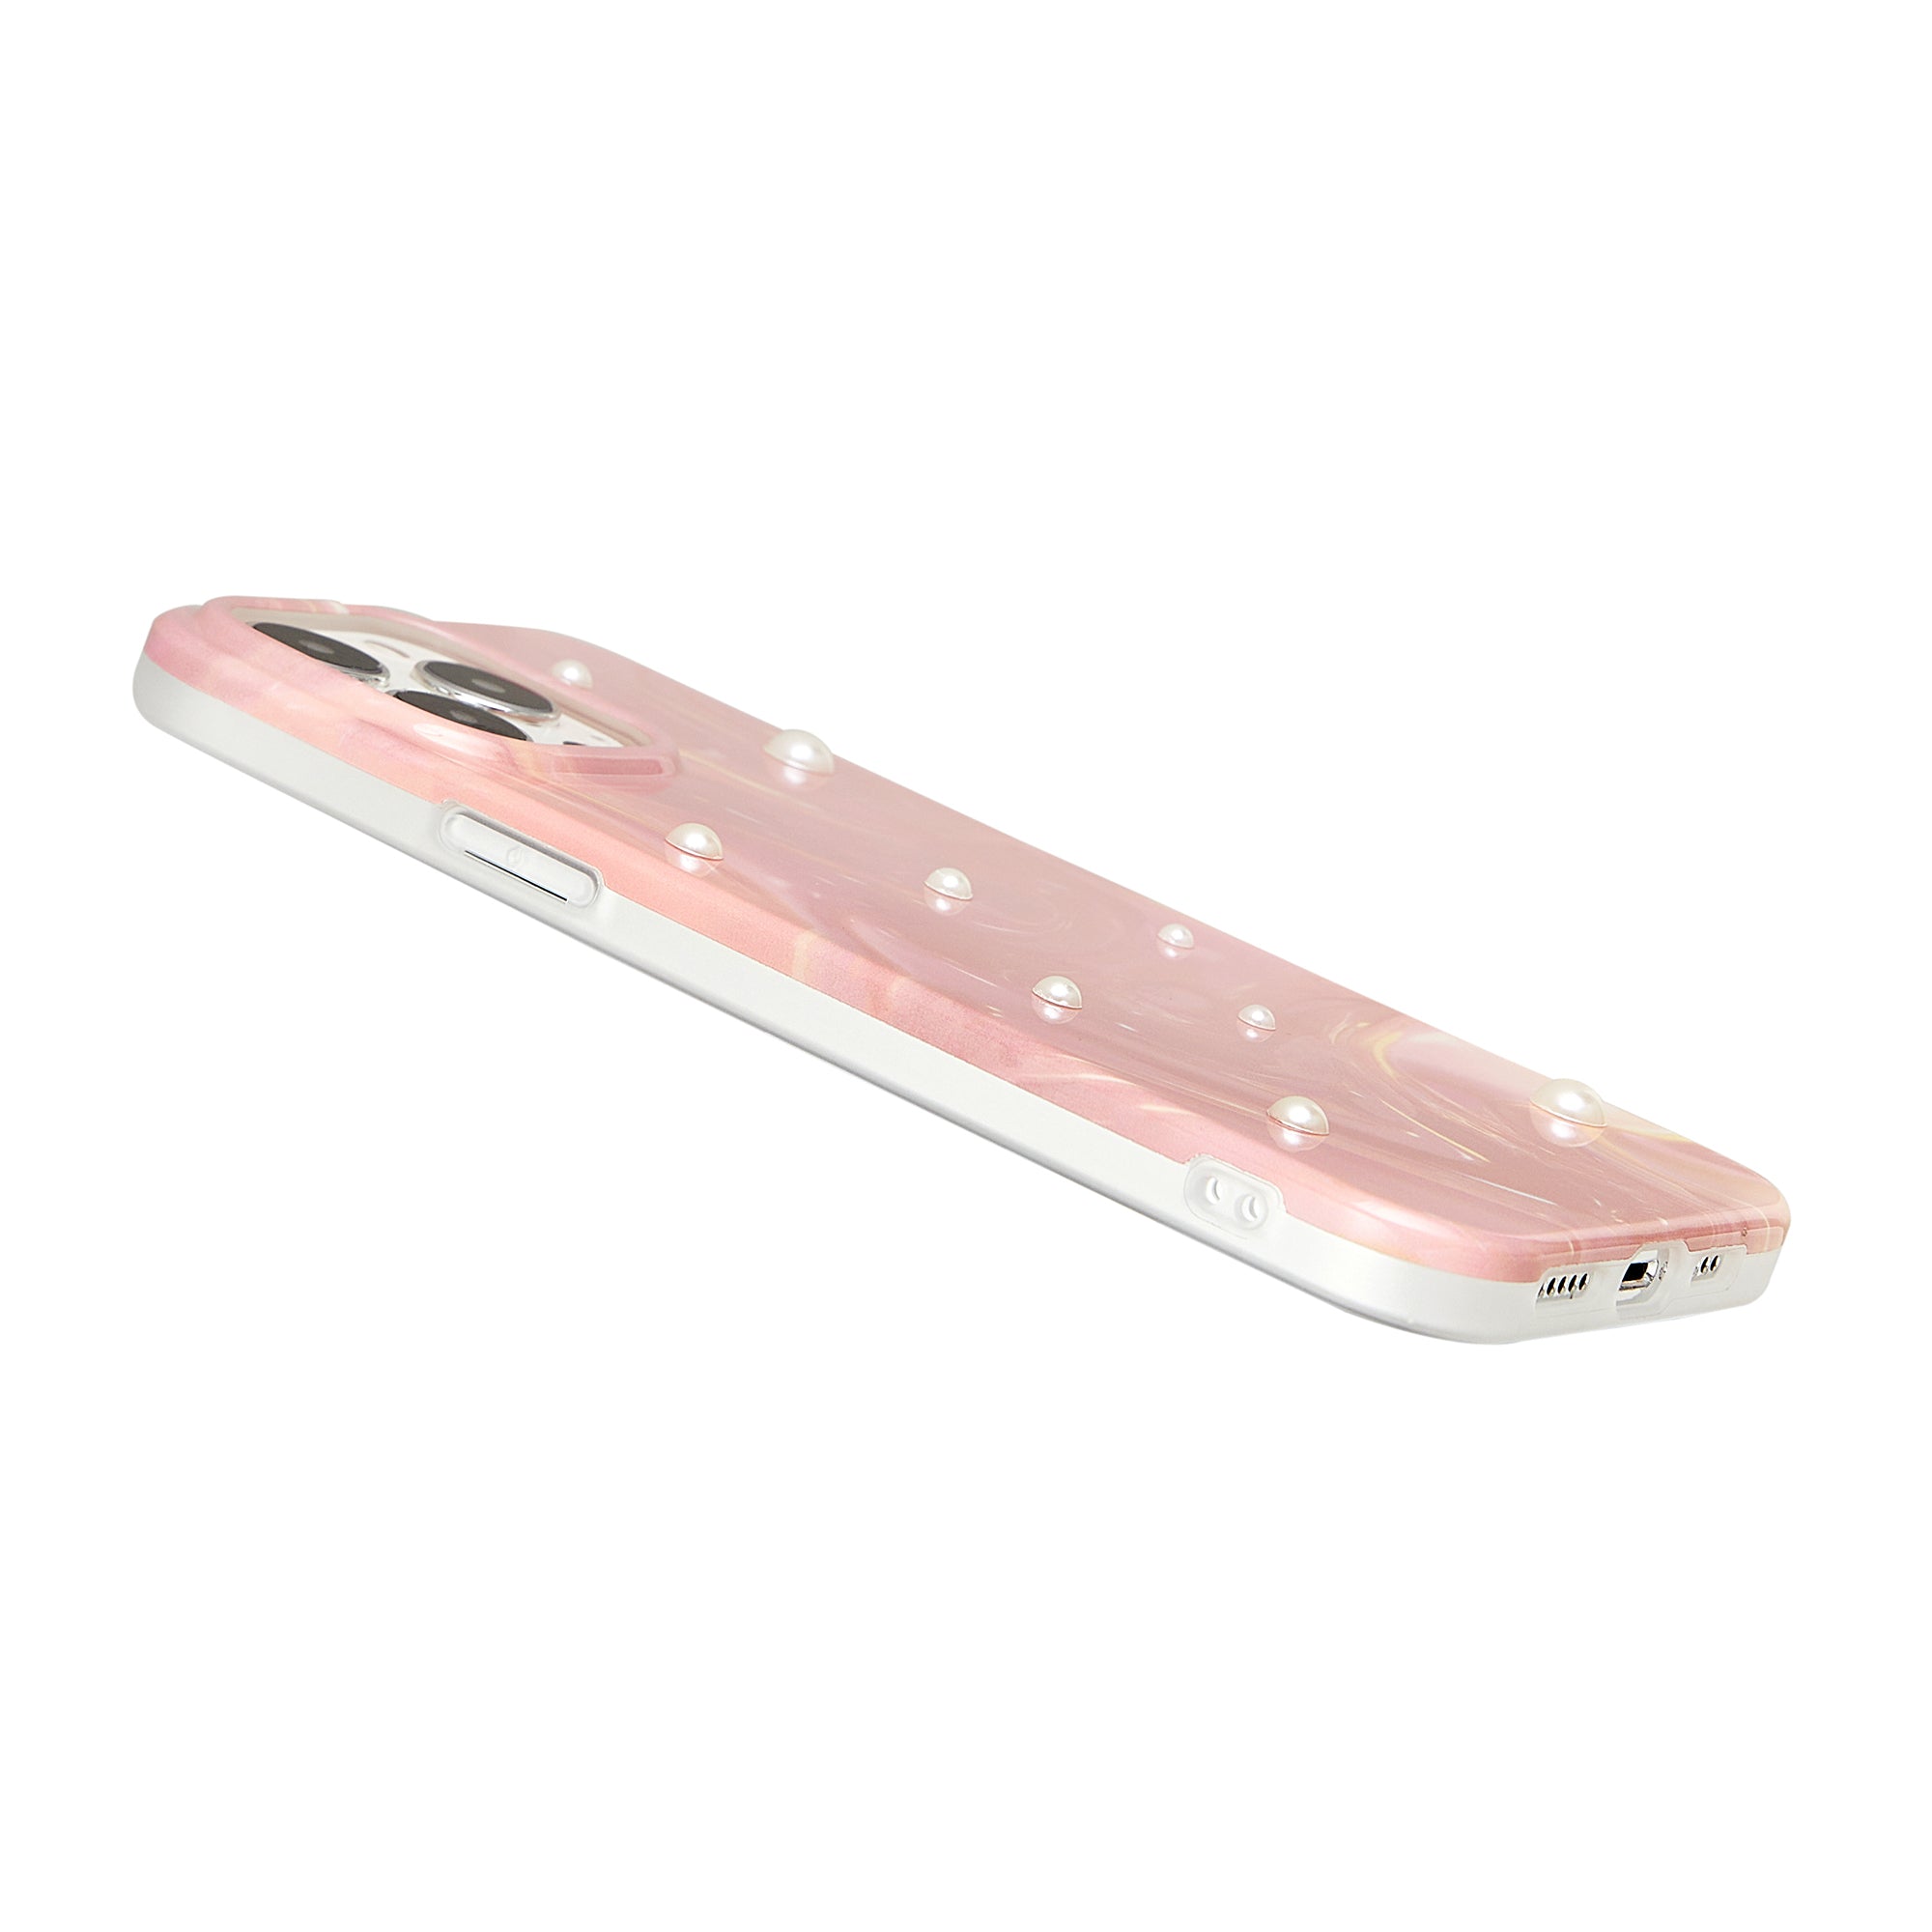 Pearl-fect Glittery Pink Phone Case